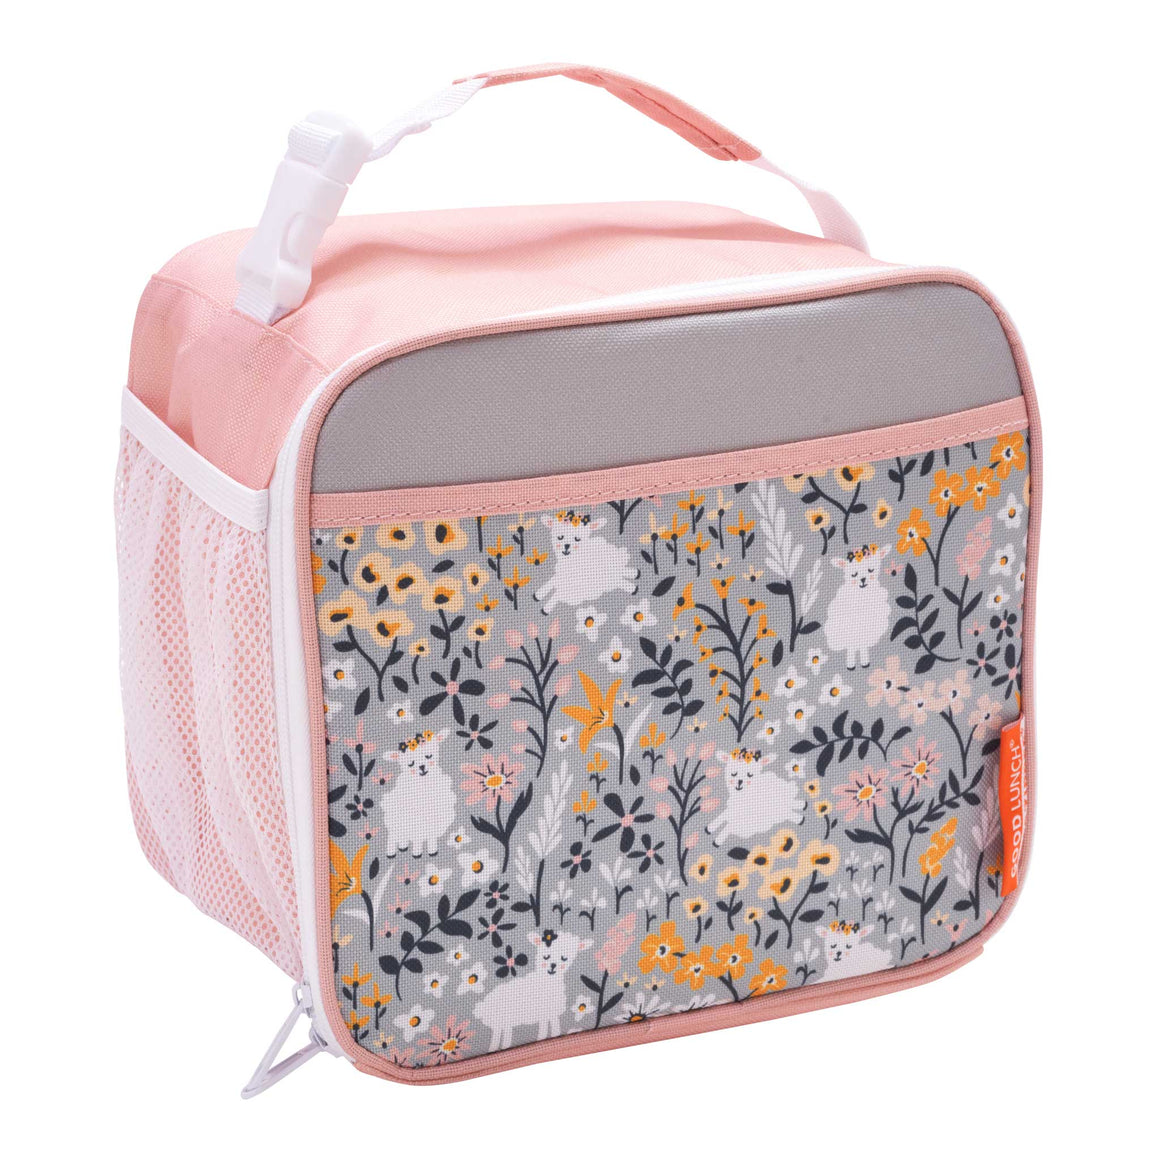 Lily The Lamb - Super Zippee Lunch Tote